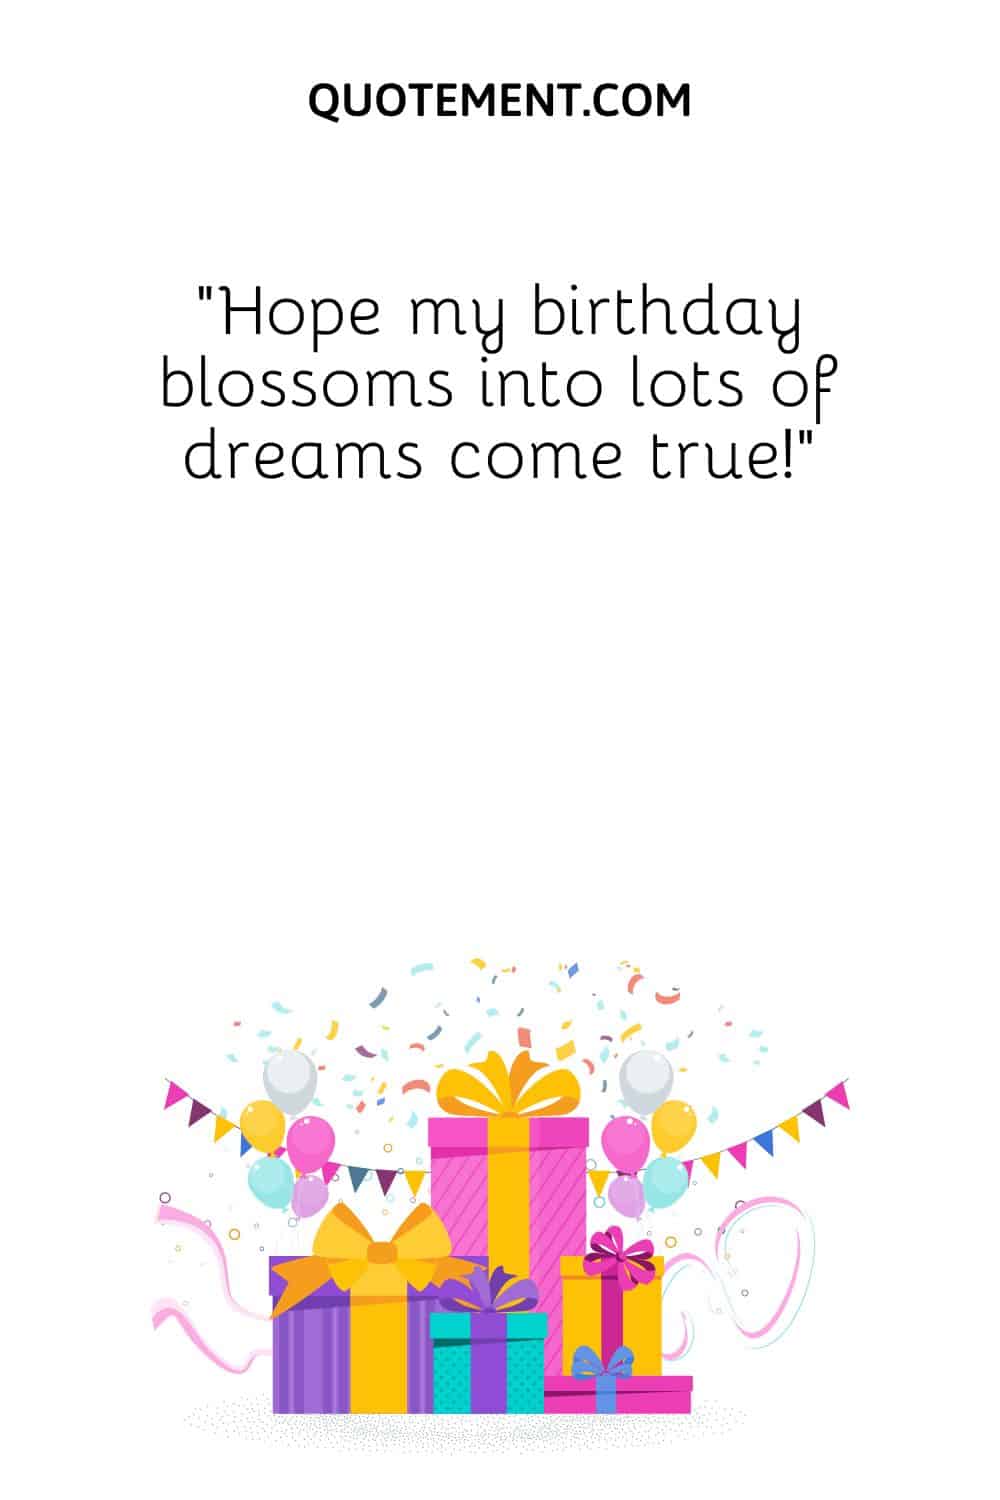 Hope my birthday blossoms into lots of dreams come true